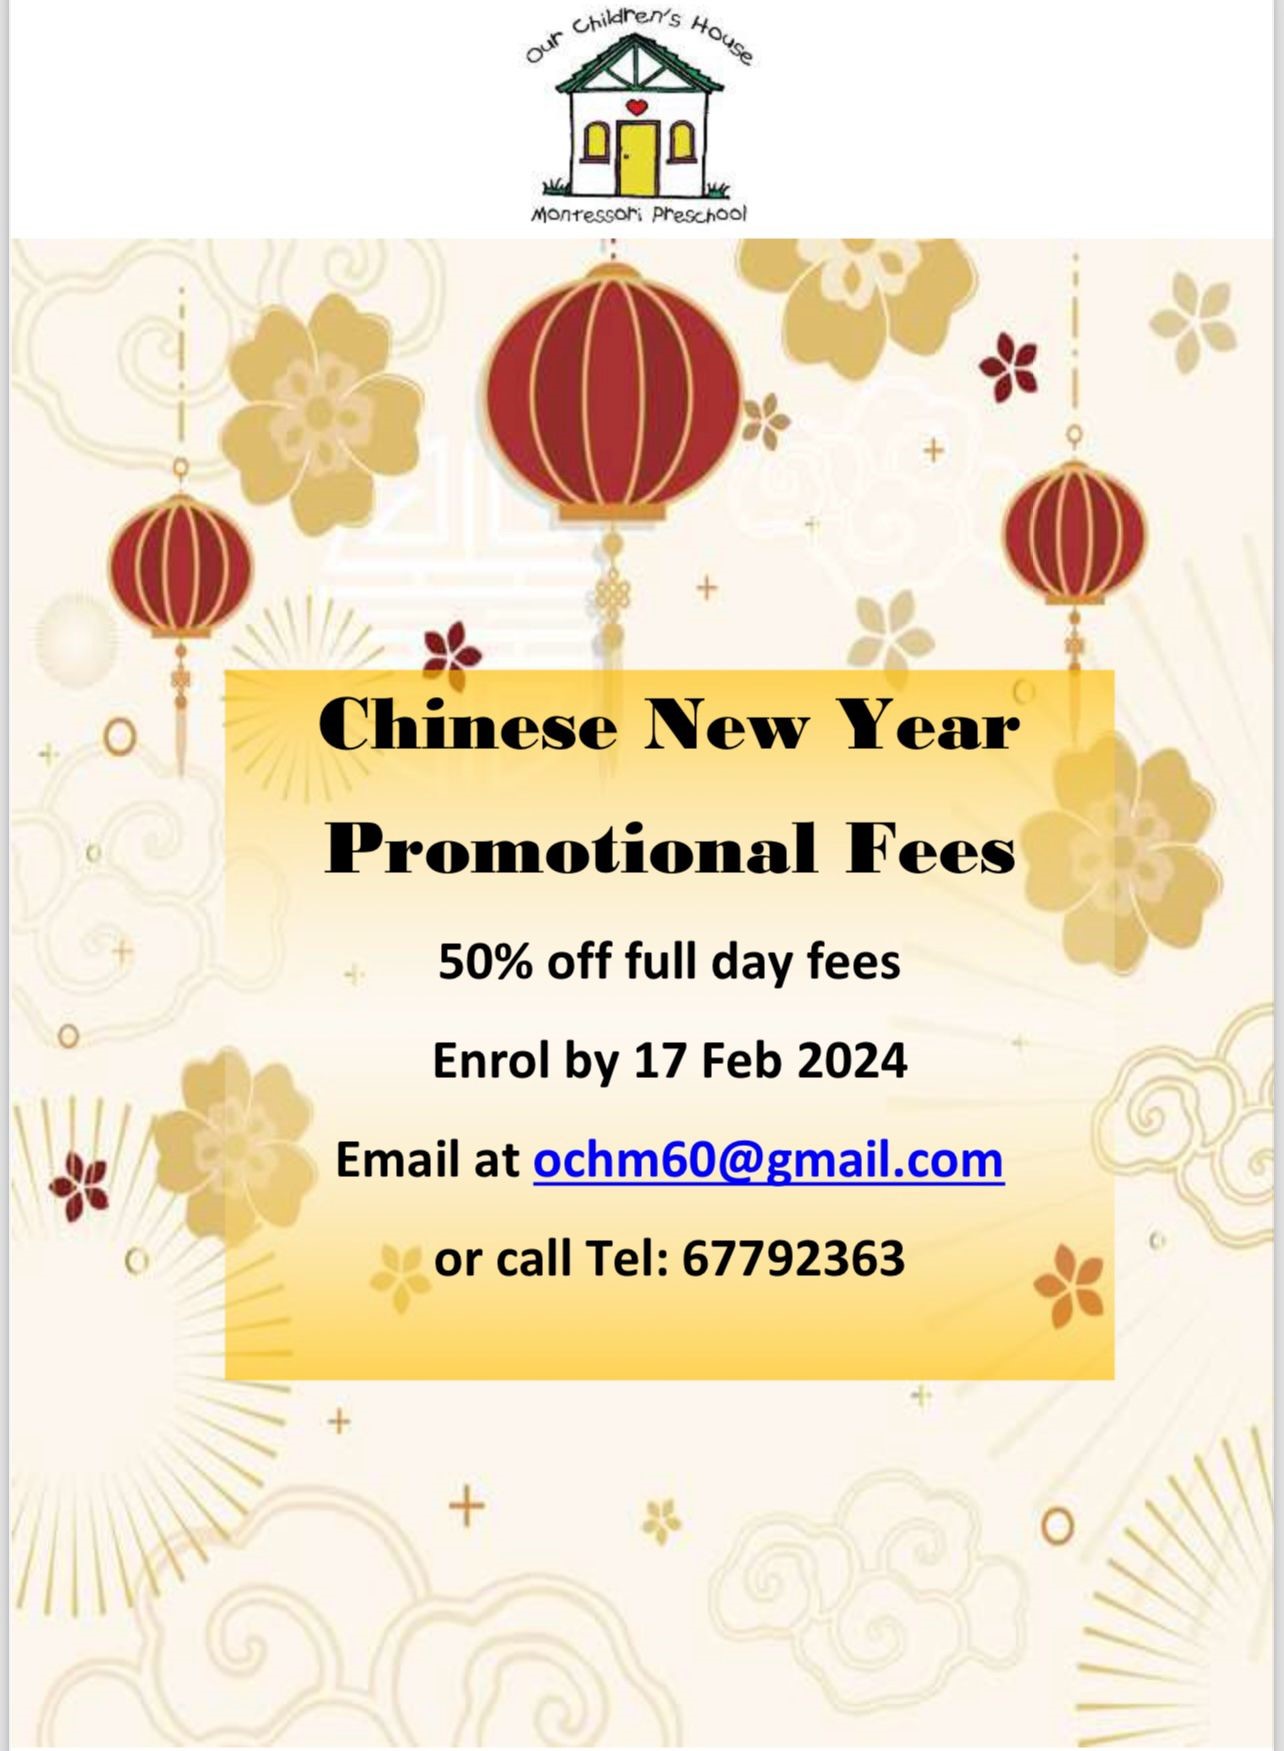 Chinese New Year Promotional Fees: 50% off full day fees. Enrol by 17 Feb 2024. Email at ochm60@gmail.com or call tel: 67792 2363